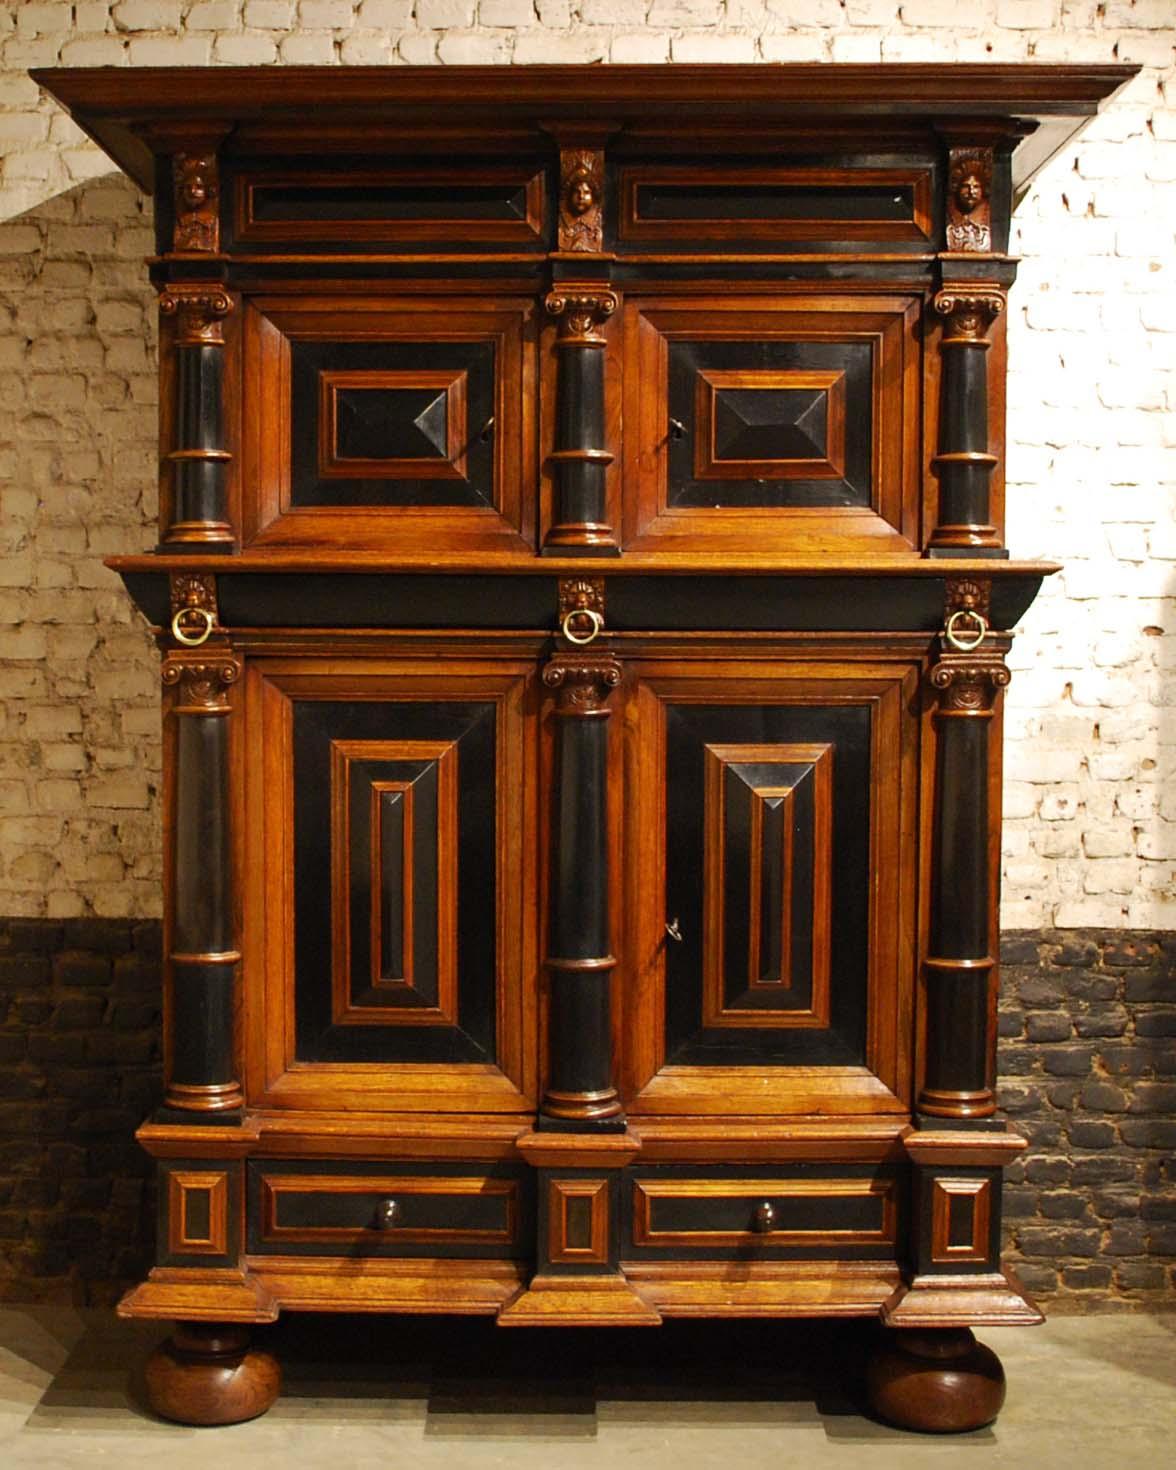 An exquisite Dutch cushion cabinet with four rectangular doors and three drawers. 
This cupboard takes its name from the pillow-shaped thickenings on the doors. The doors are flanked by semicircular ebony veneered columns. In the middle sits a